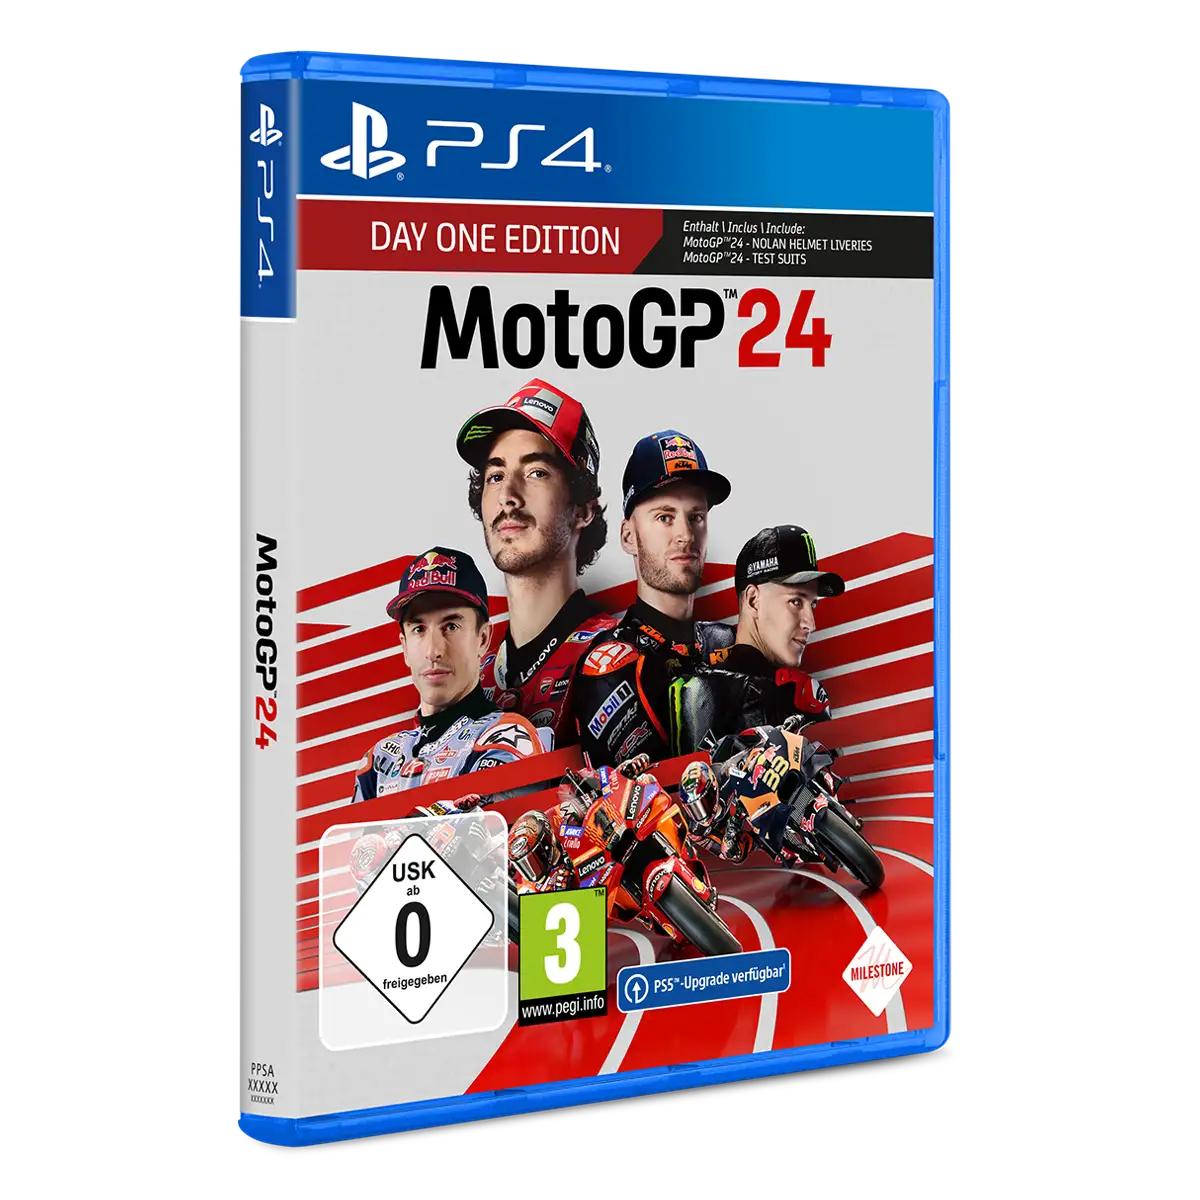 MotoGP 24 Day One Edition (PS4) Image 2